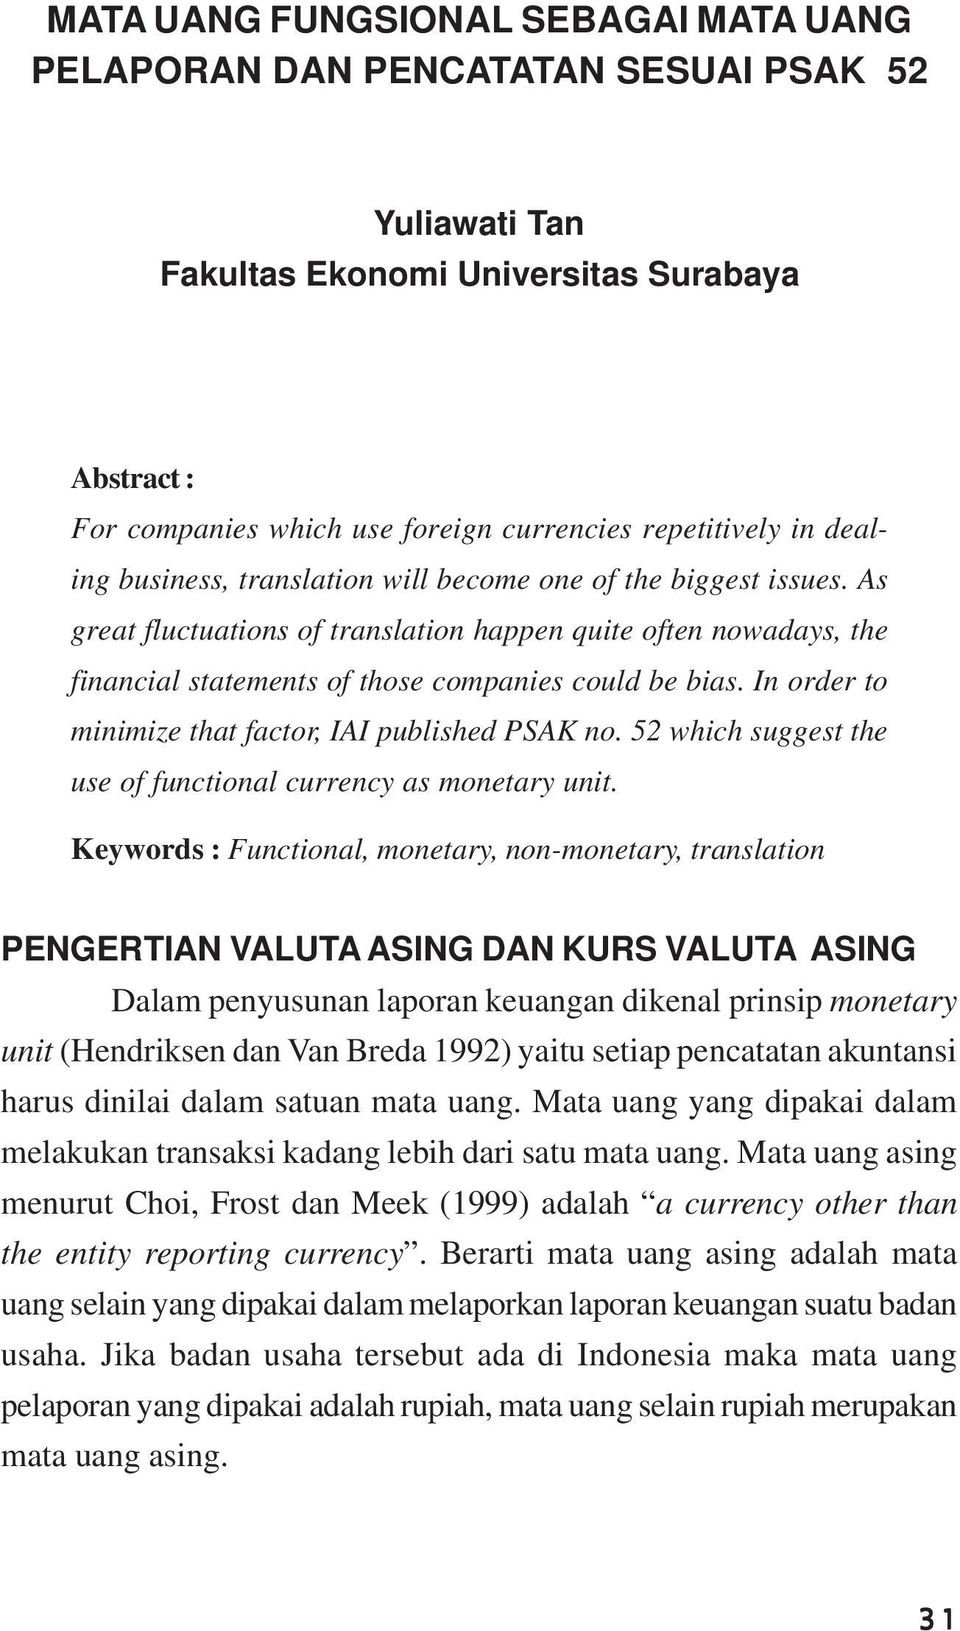 In order to minimize that factor, IAI published PSAK no. 52 which suggest the use of functional currency as monetary unit.